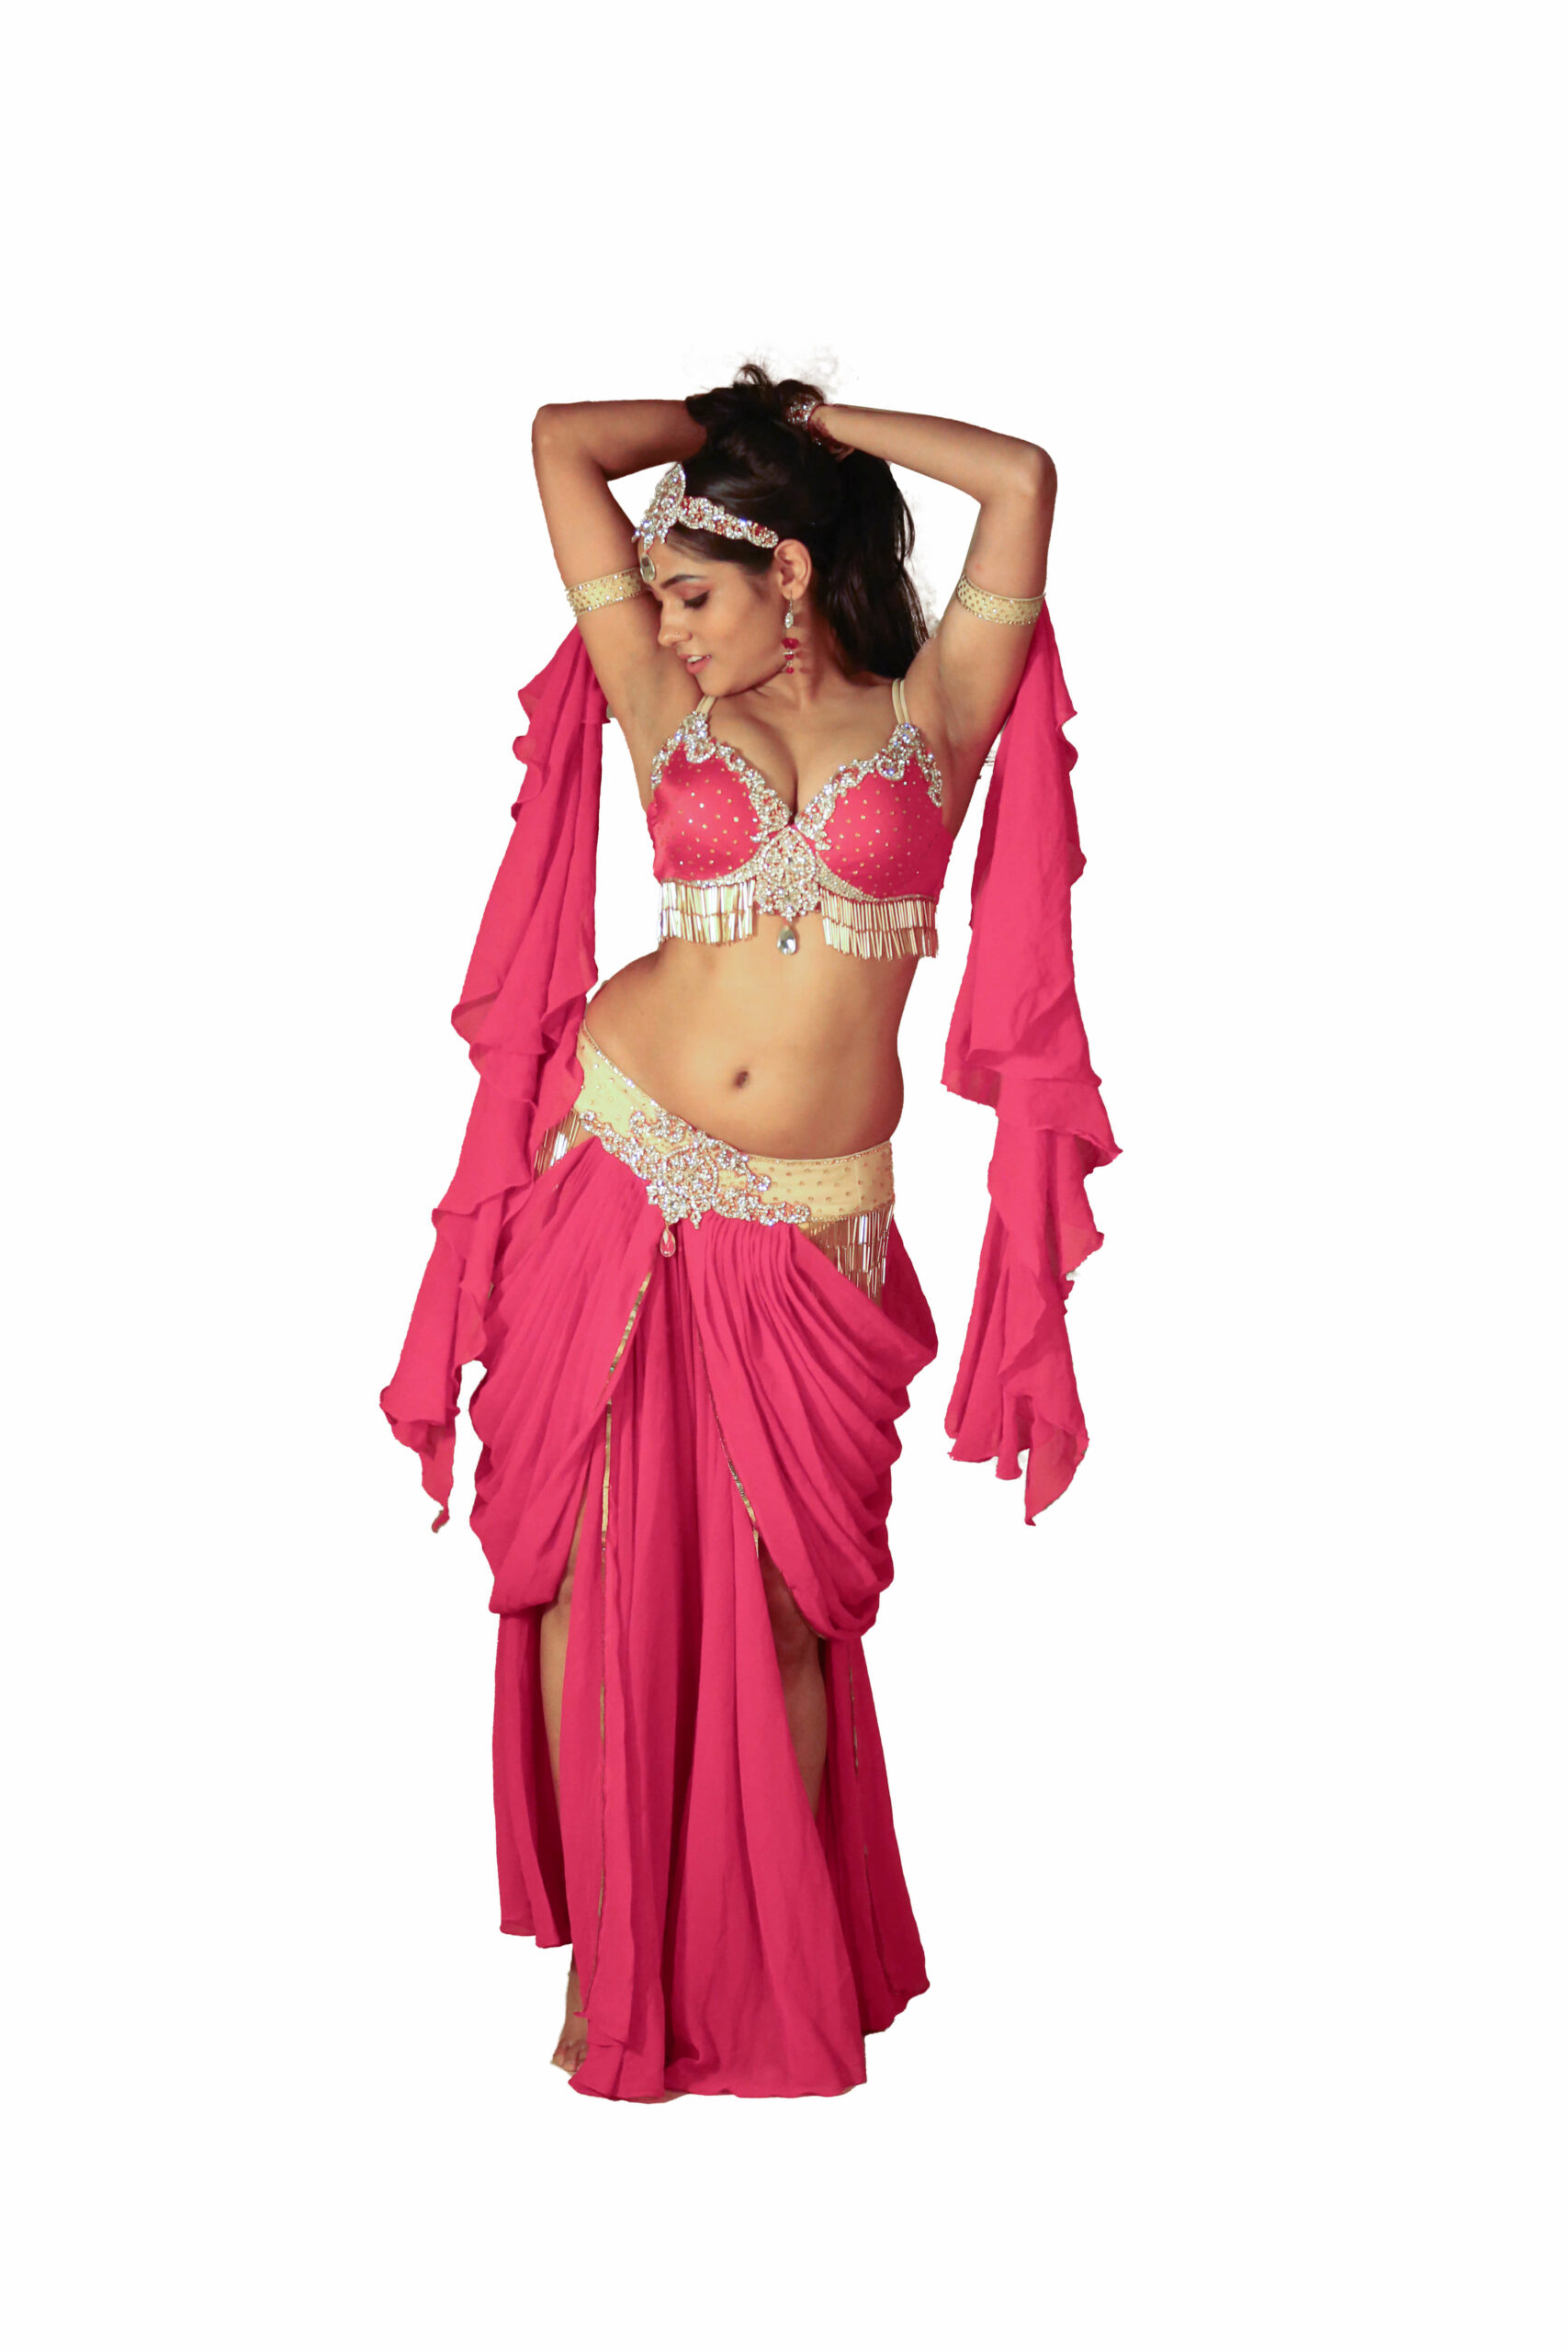 Belly Dance Costumes | Belly Dance Store.com: gallery | Belly dance  costumes, Belly dance outfit, Dance costumes